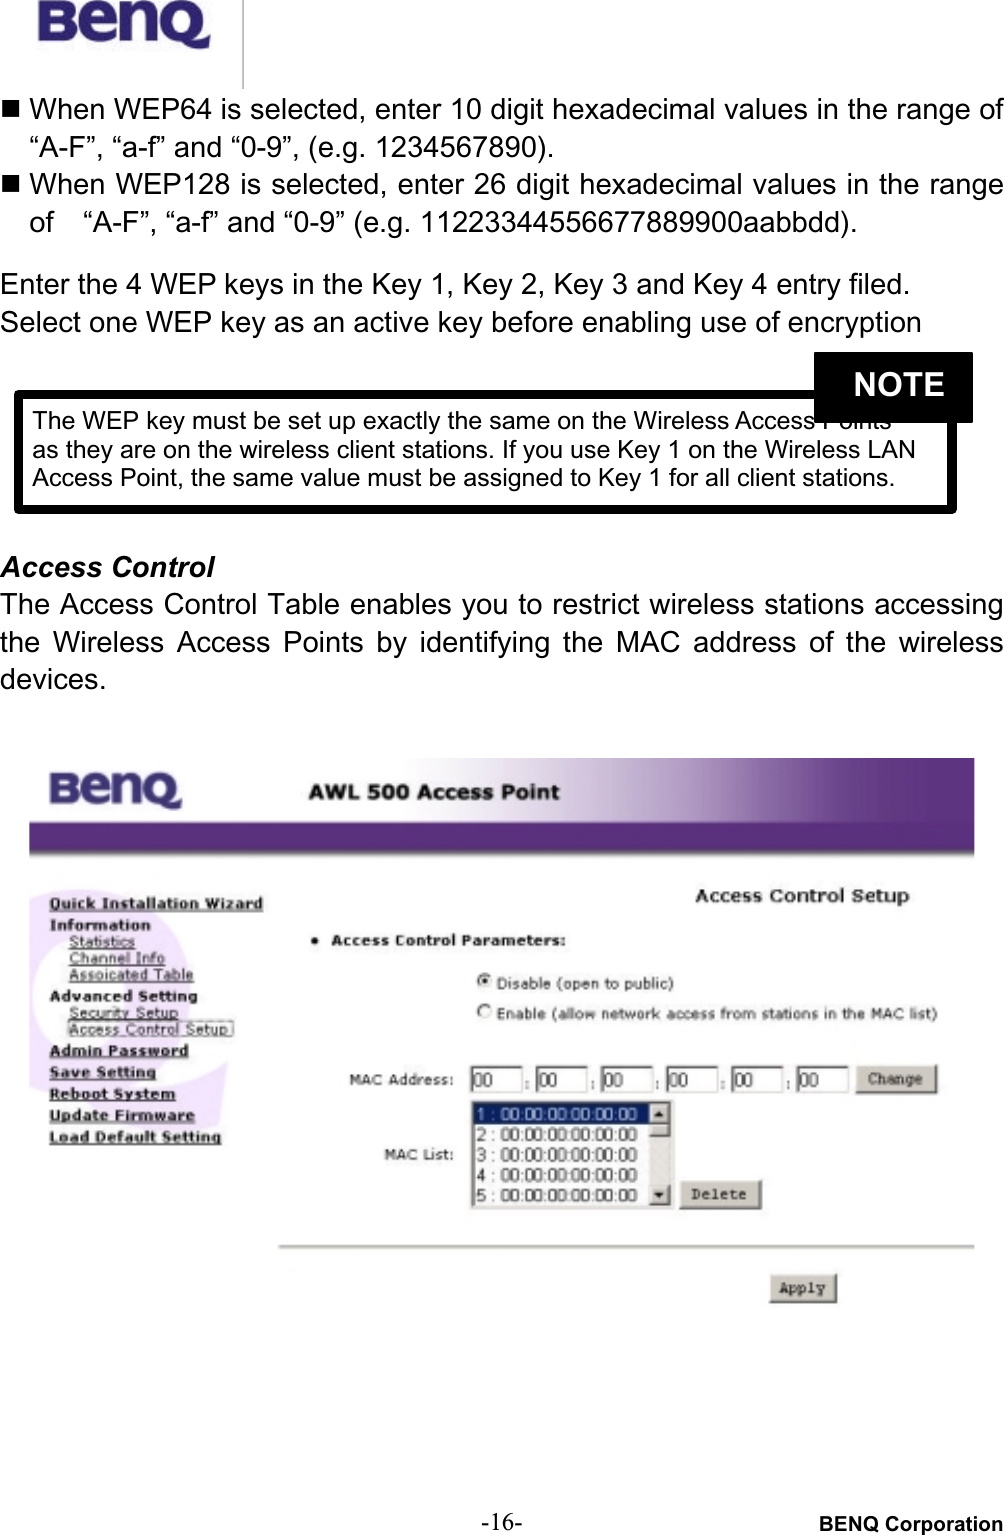 BENQ Corporation-16-# When WEP64 is selected, enter 10 digit hexadecimal values in the range of “A-F”, “a-f” and “0-9”, (e.g. 1234567890).# When WEP128 is selected, enter 26 digit hexadecimal values in the rangeof   “A-F”, “a-f” and “0-9” (e.g. 11223344556677889900aabbdd).Enter the 4 WEP keys in the Key 1, Key 2, Key 3 and Key 4 entry filed.Select one WEP key as an active key before enabling use of encryptionAccess ControlThe Access Control Table enables you to restrict wireless stations accessingthe  Wireless  Access  Points  by identifying  the  MAC  address  of  the  wirelessdevices.The WEP key must be set up exactly the same on the Wireless Access Points as they are on the wireless client stations. If you use Key 1 on the Wireless LANAccess Point, the same value must be assigned to Key 1 for all client stations.NOTE